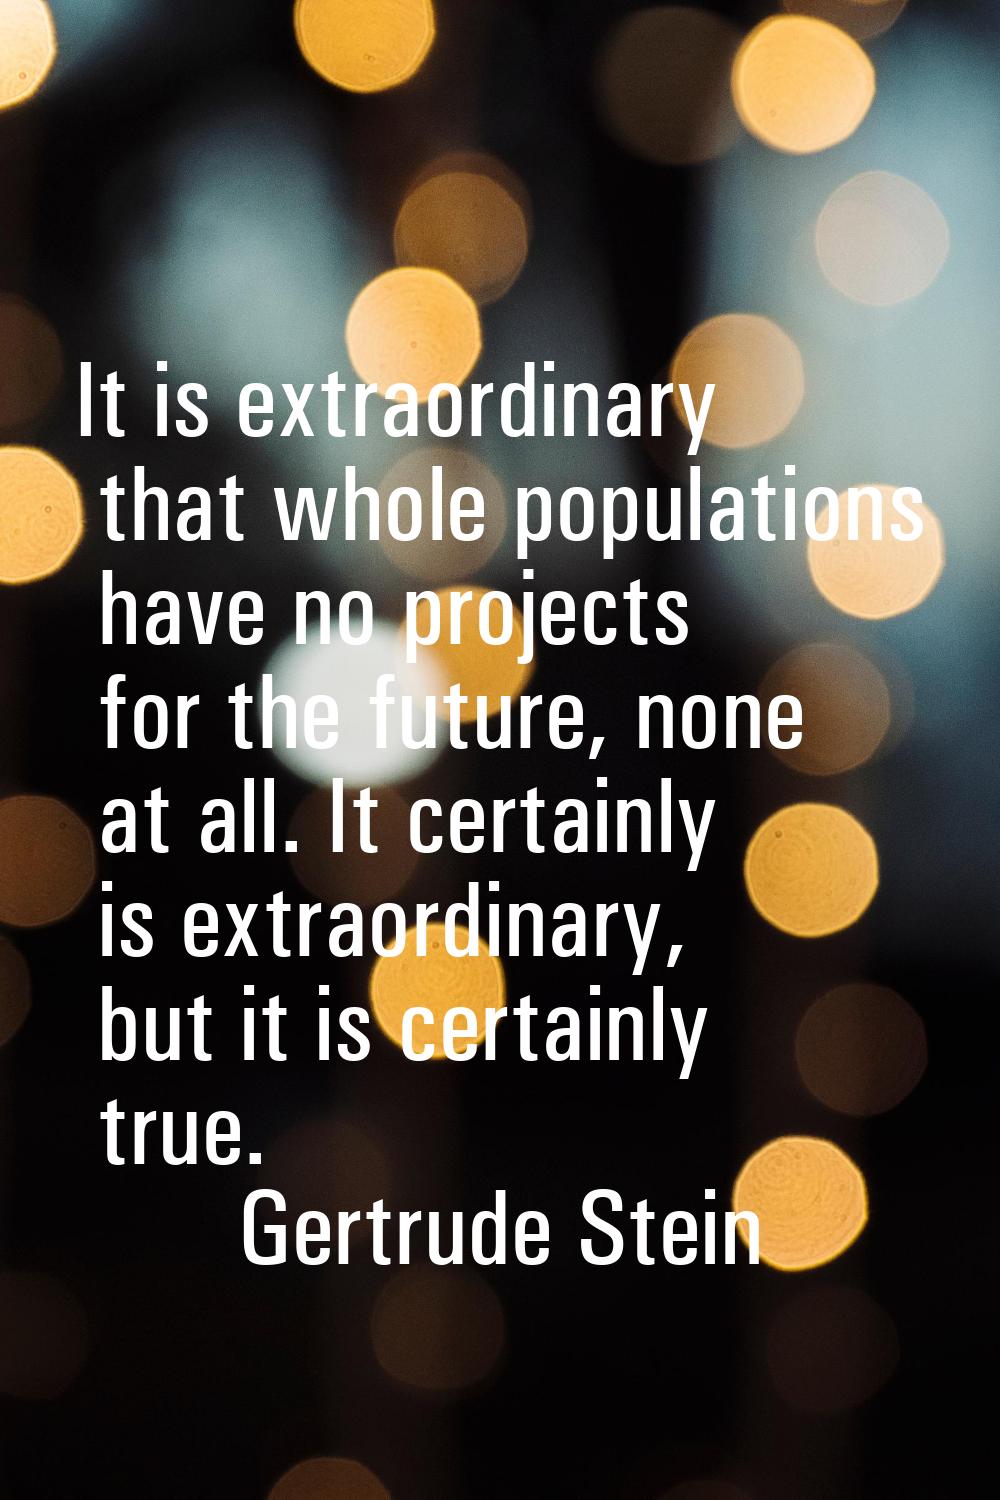 It is extraordinary that whole populations have no projects for the future, none at all. It certain